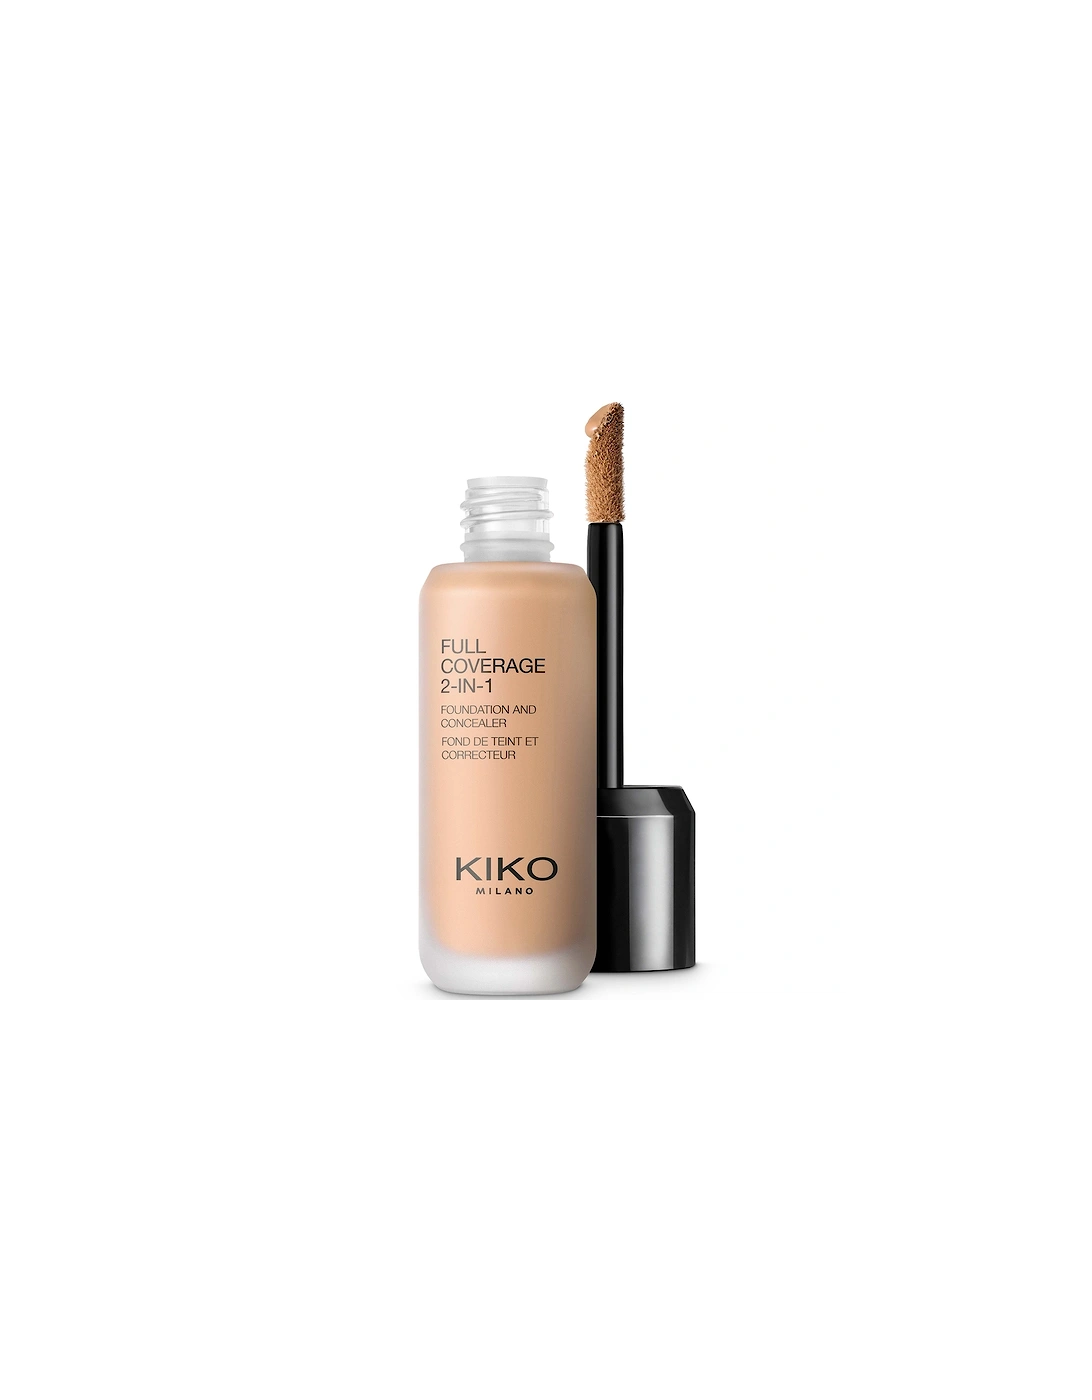 Full Coverage 2-in-1 Foundation and Concealer 25ml - 65 Neutral, 2 of 1